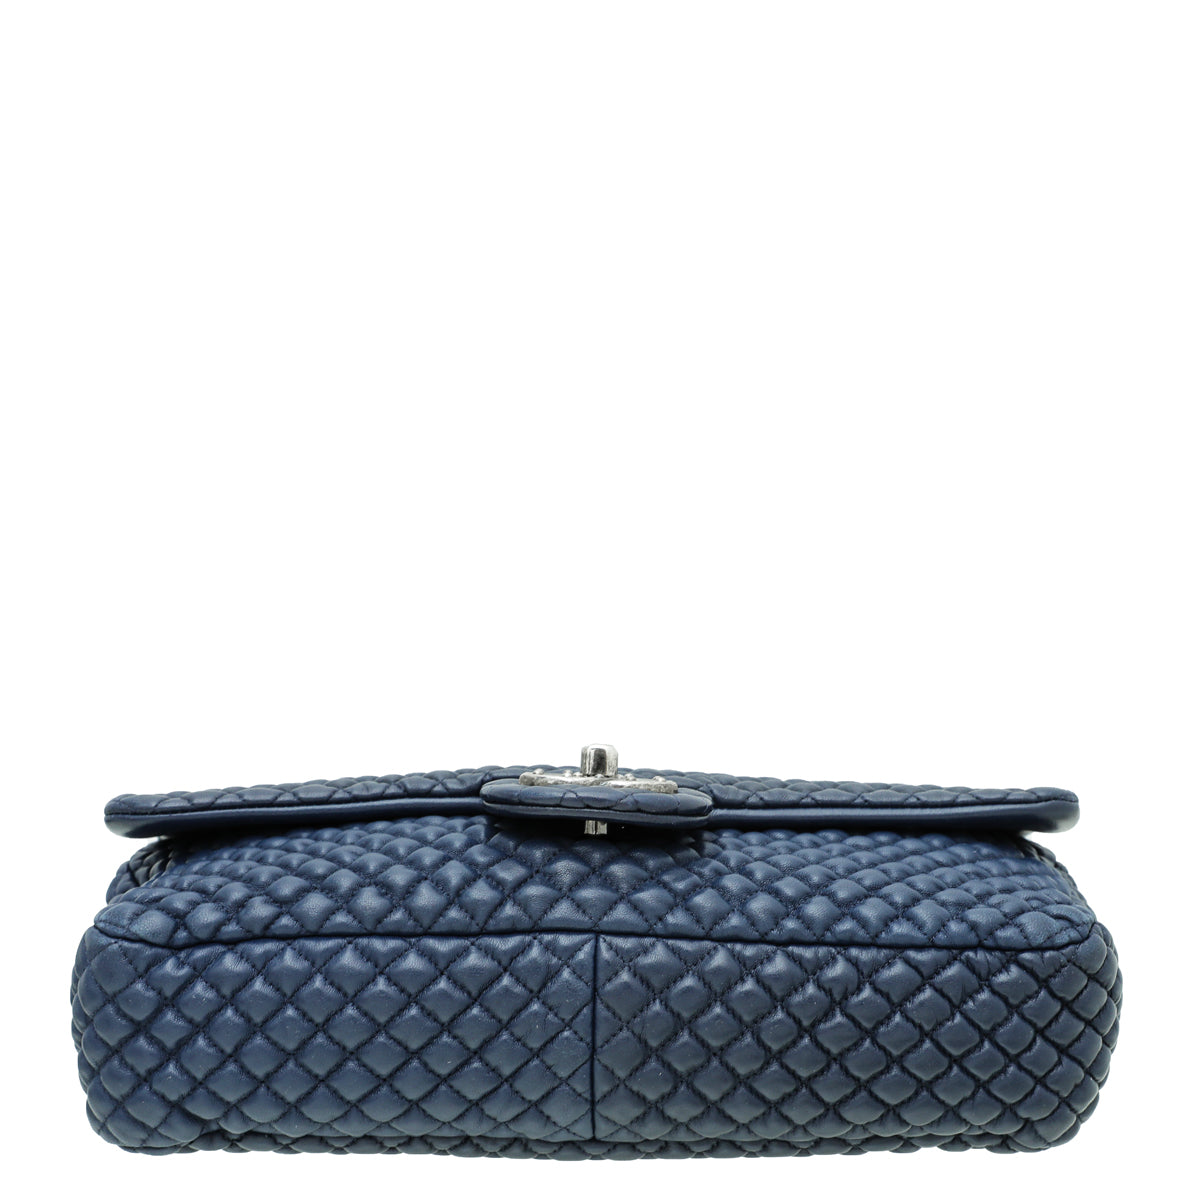 Chanel Navy Blue CC Micro Quilted Flap Medium Bag